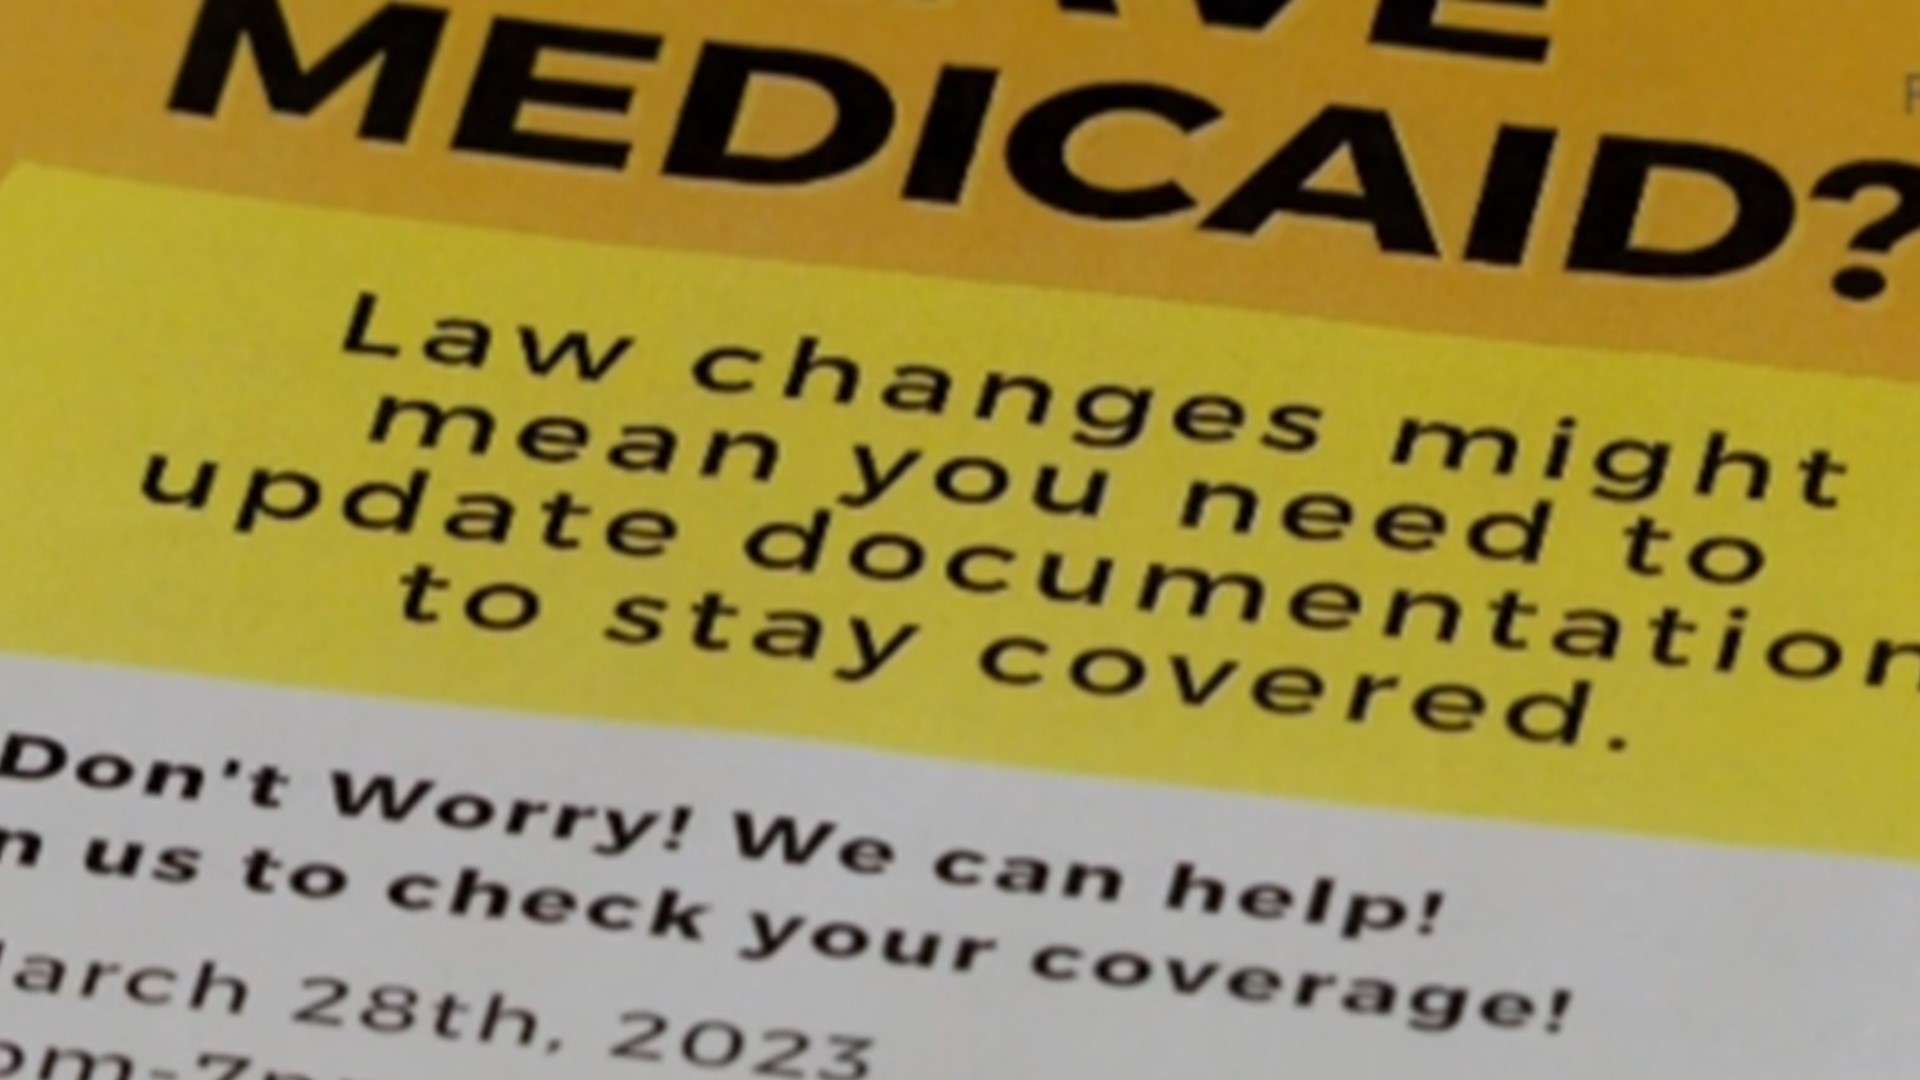 Last year, about 850,000 Iowans were on Medicaid. Now, some of those people could be losing coverage.